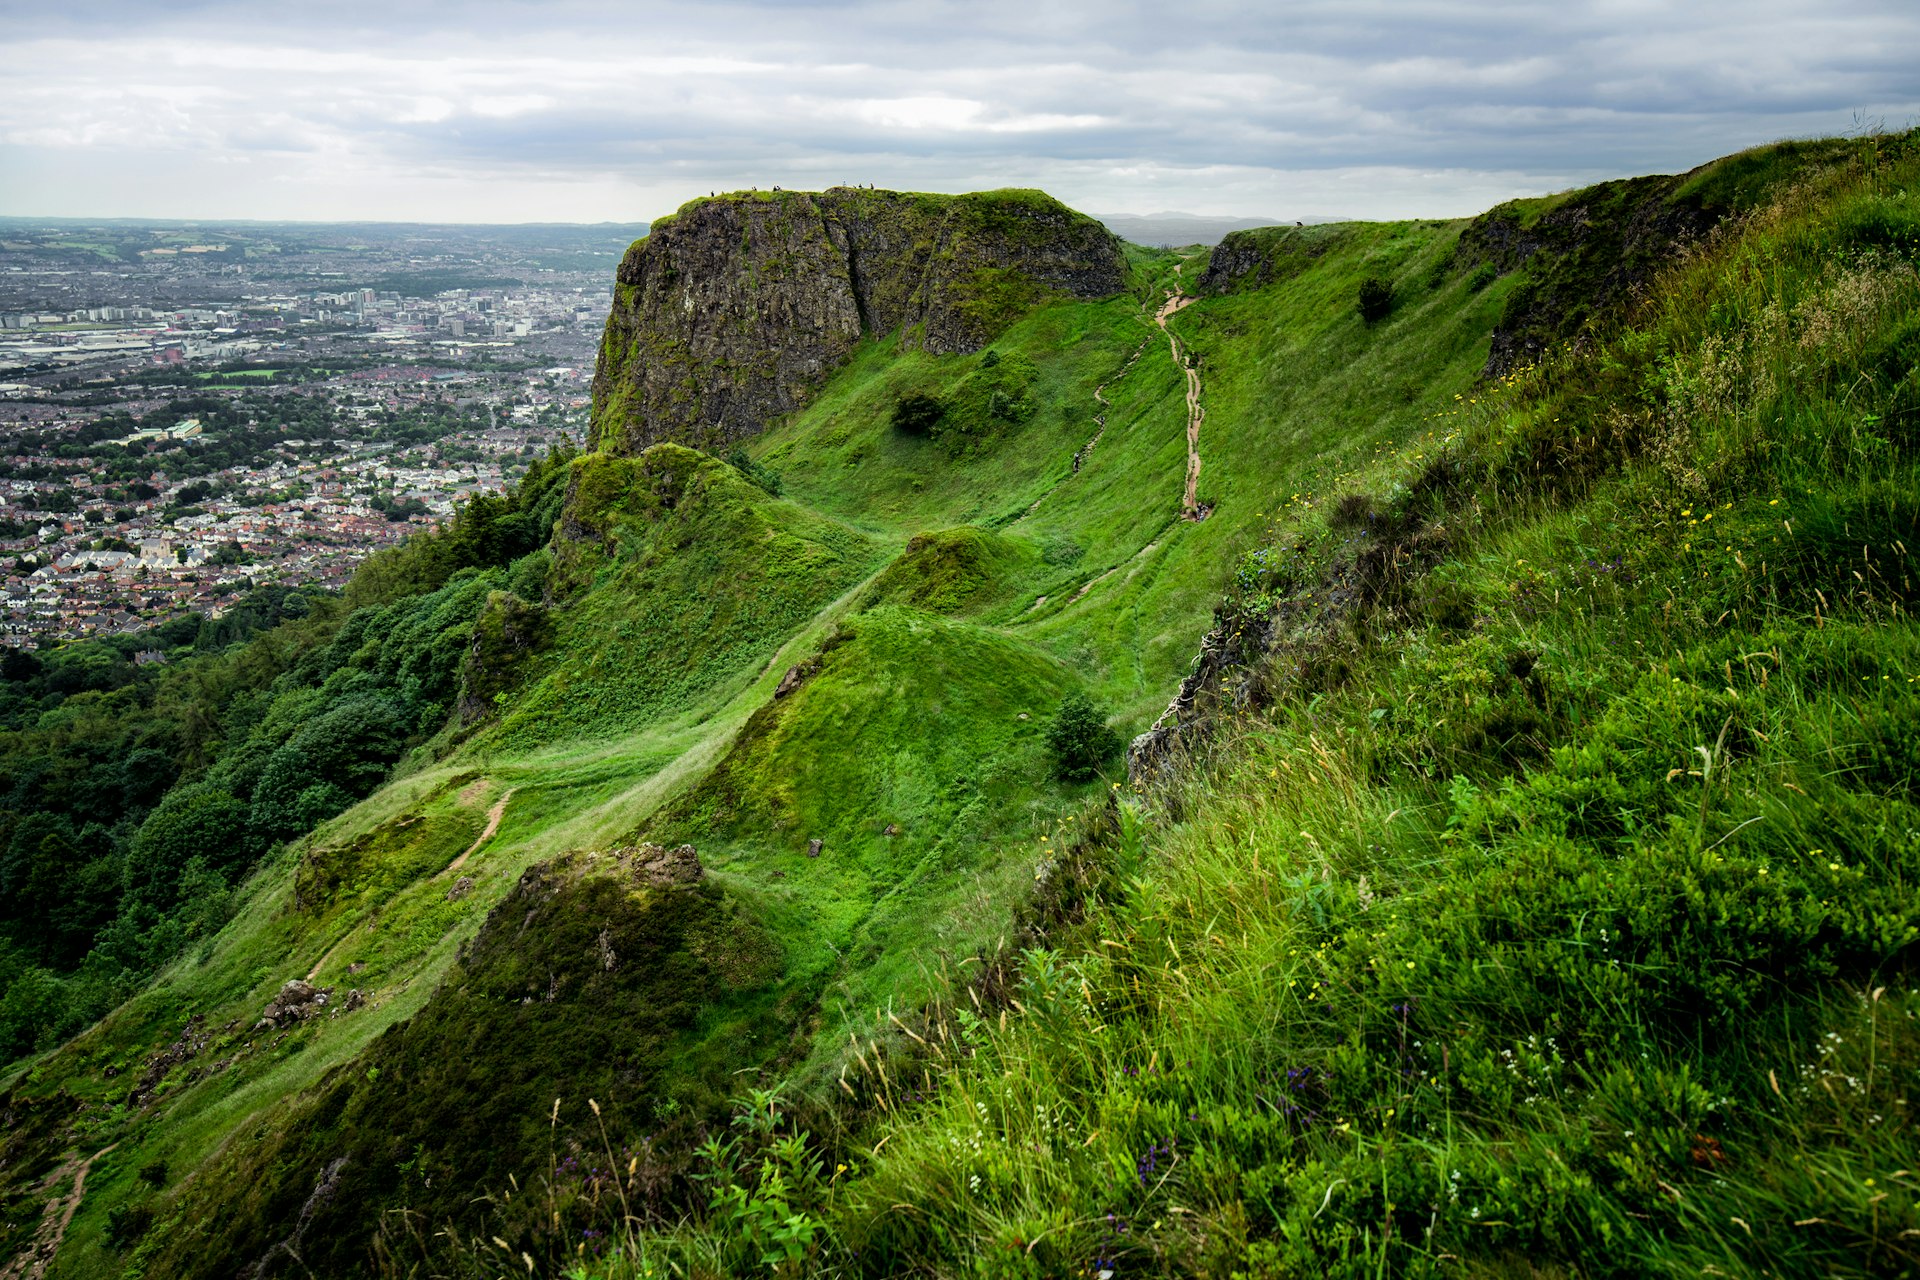 The emerald green hulk of Cave Hill Country Park in Belfast, Northern Ireland stands above the city and is crisscrossed with hiking paths